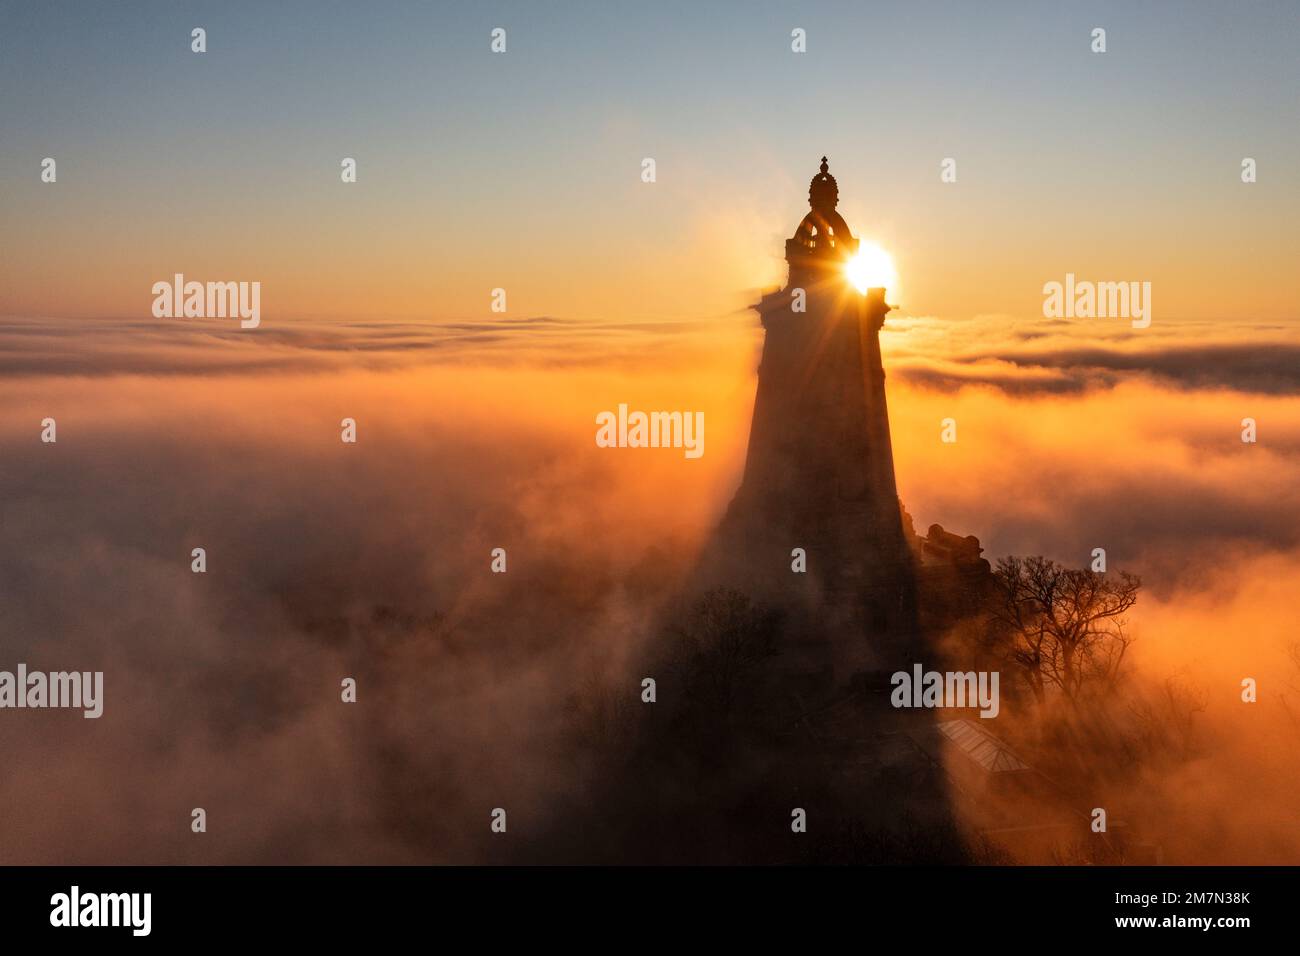 Germany, Thuringia, Bad Frankenhausen, tower of Kyffhäuser monument rises from low clouds, sunrise, back light Stock Photo